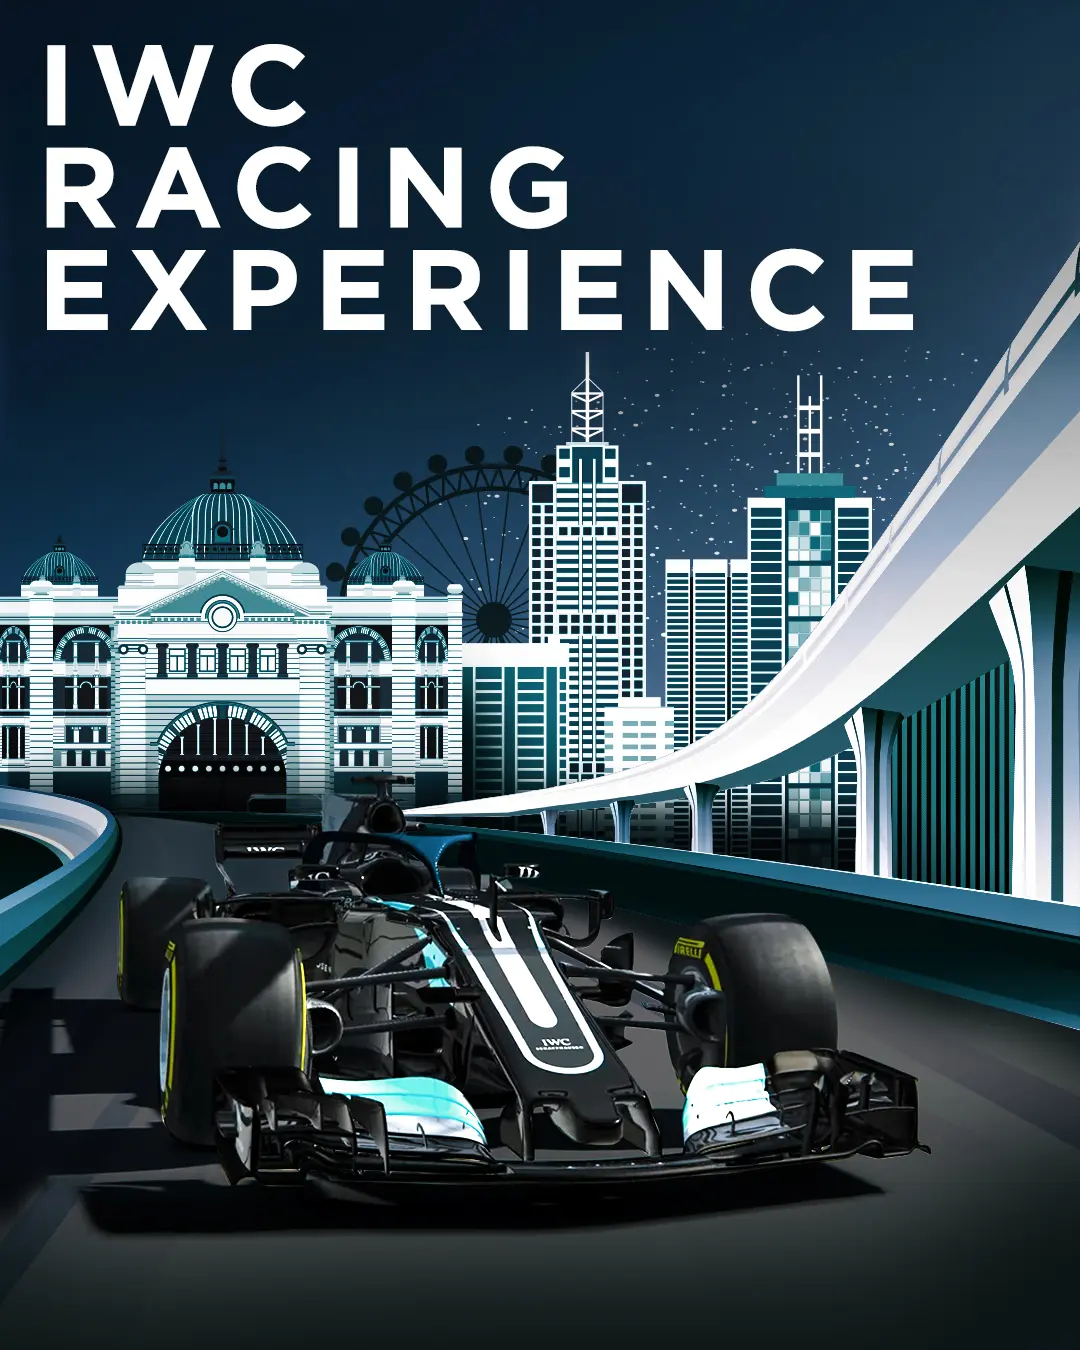 FRIDAY WIND DOWN Race over to Chadstone for an adrenaline-filled IWC experience